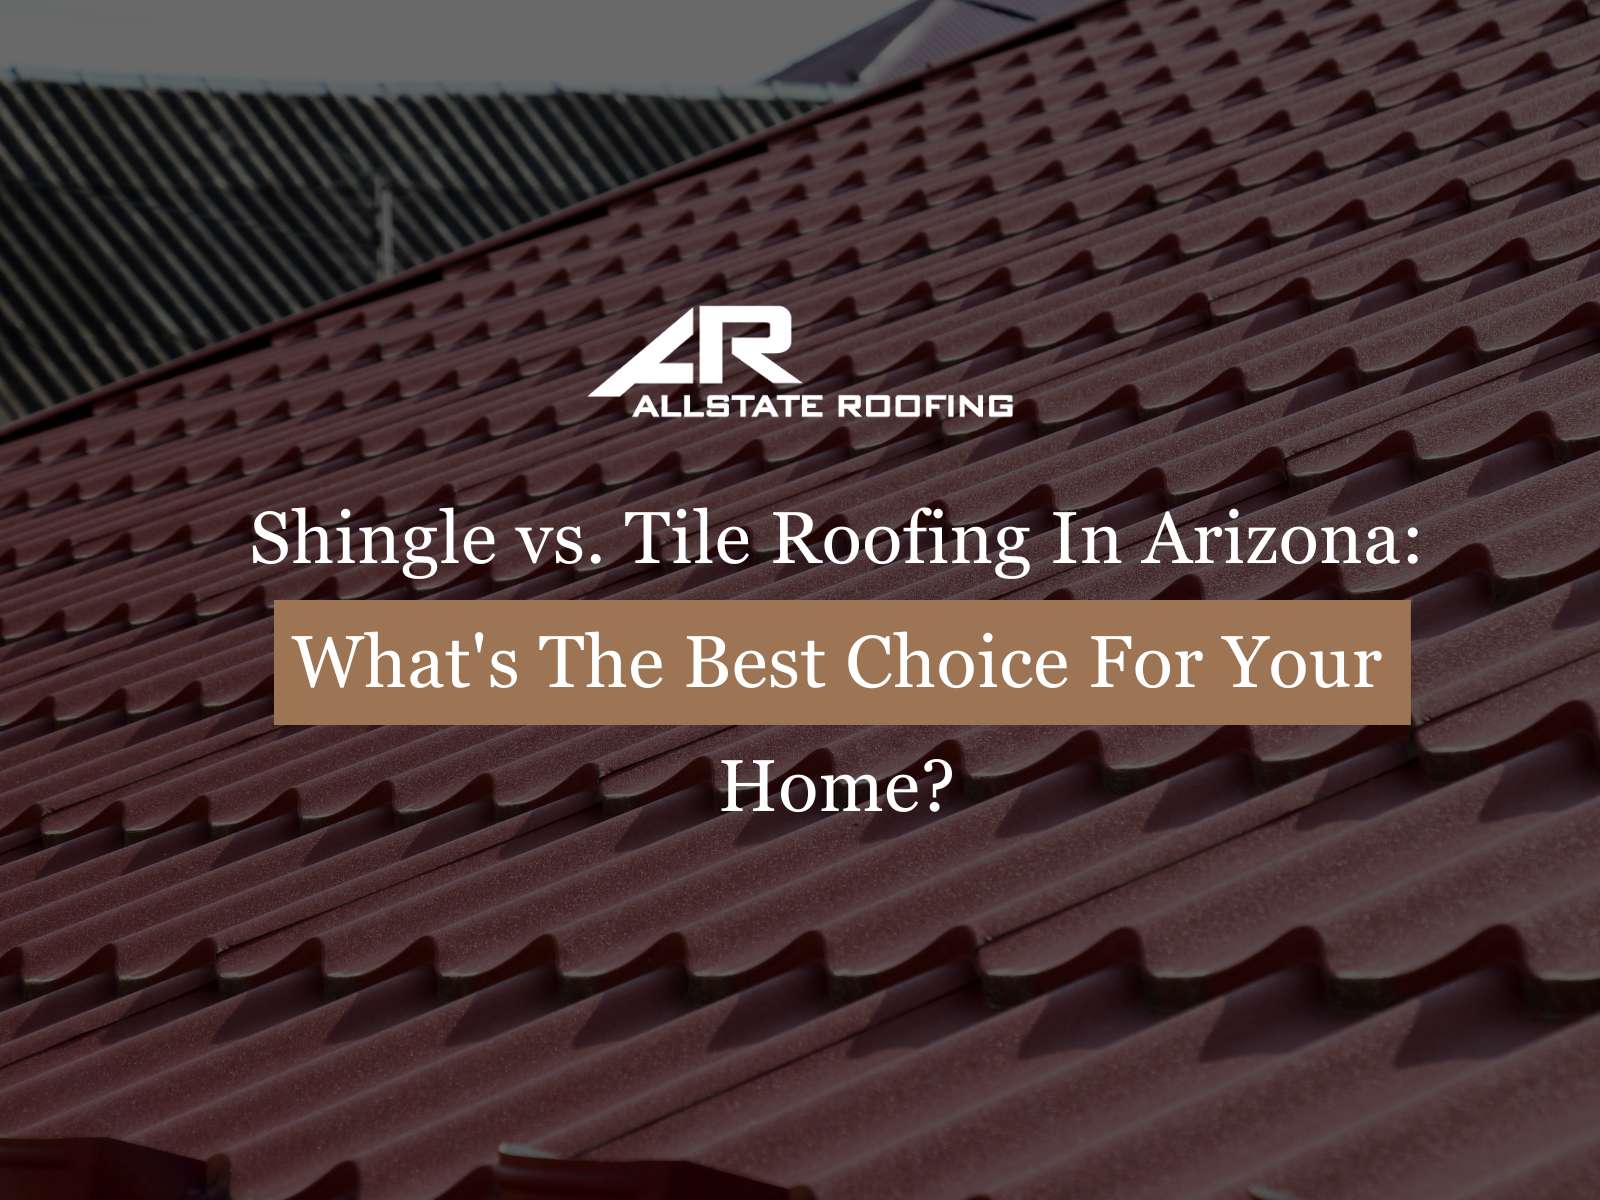 Shingle vs. Tile Roofing In Arizona What's The Best Choice For Your Home